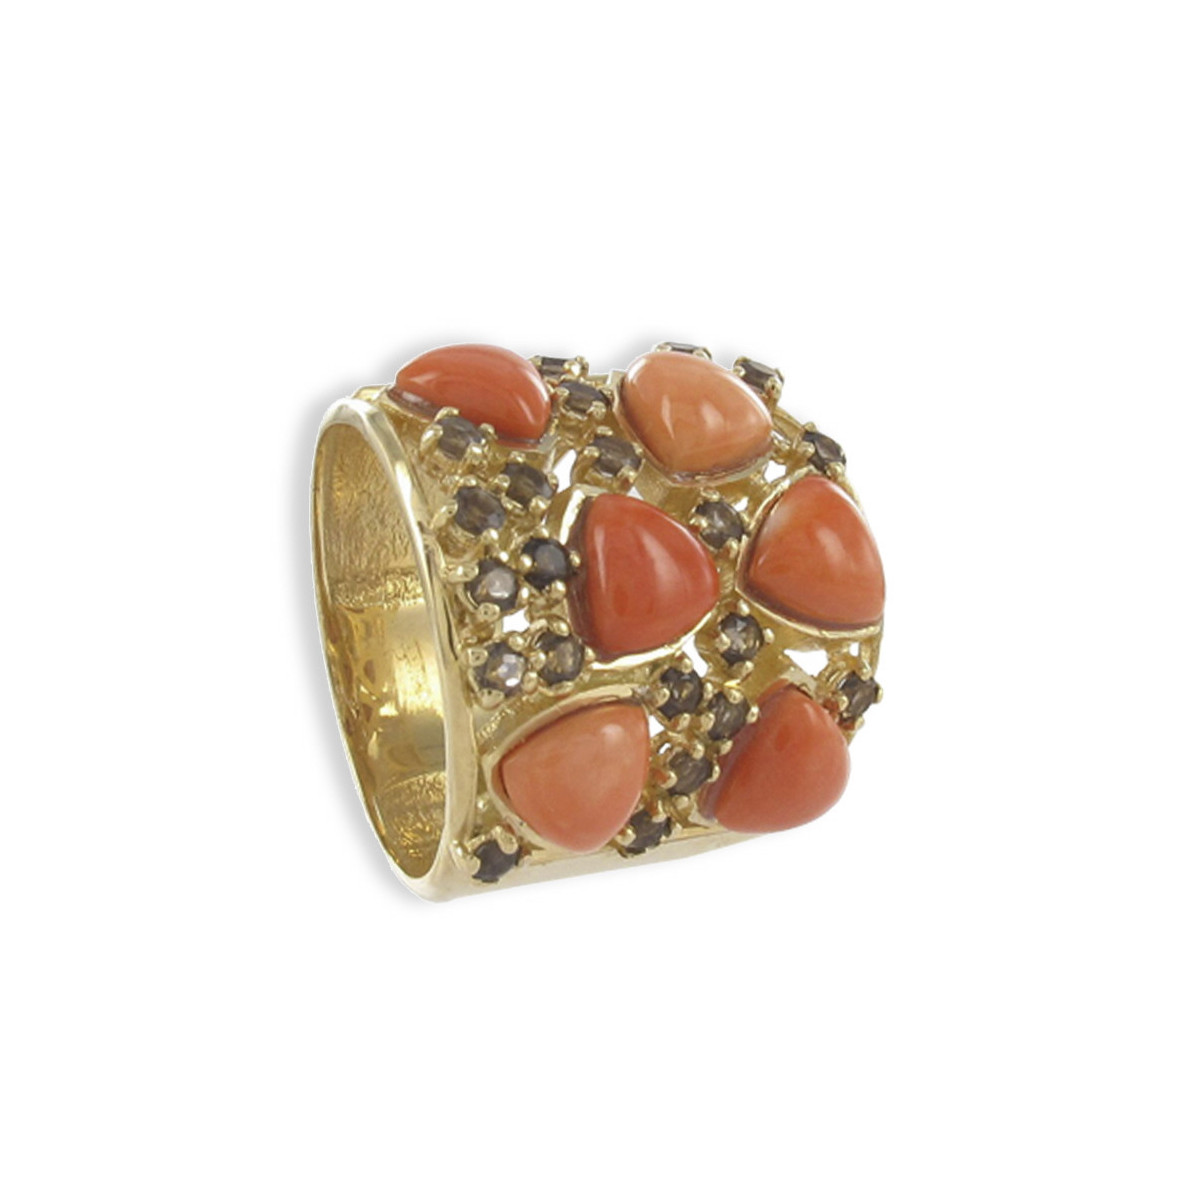 GOLD RING WITH CORAL AND NATURAL STONES